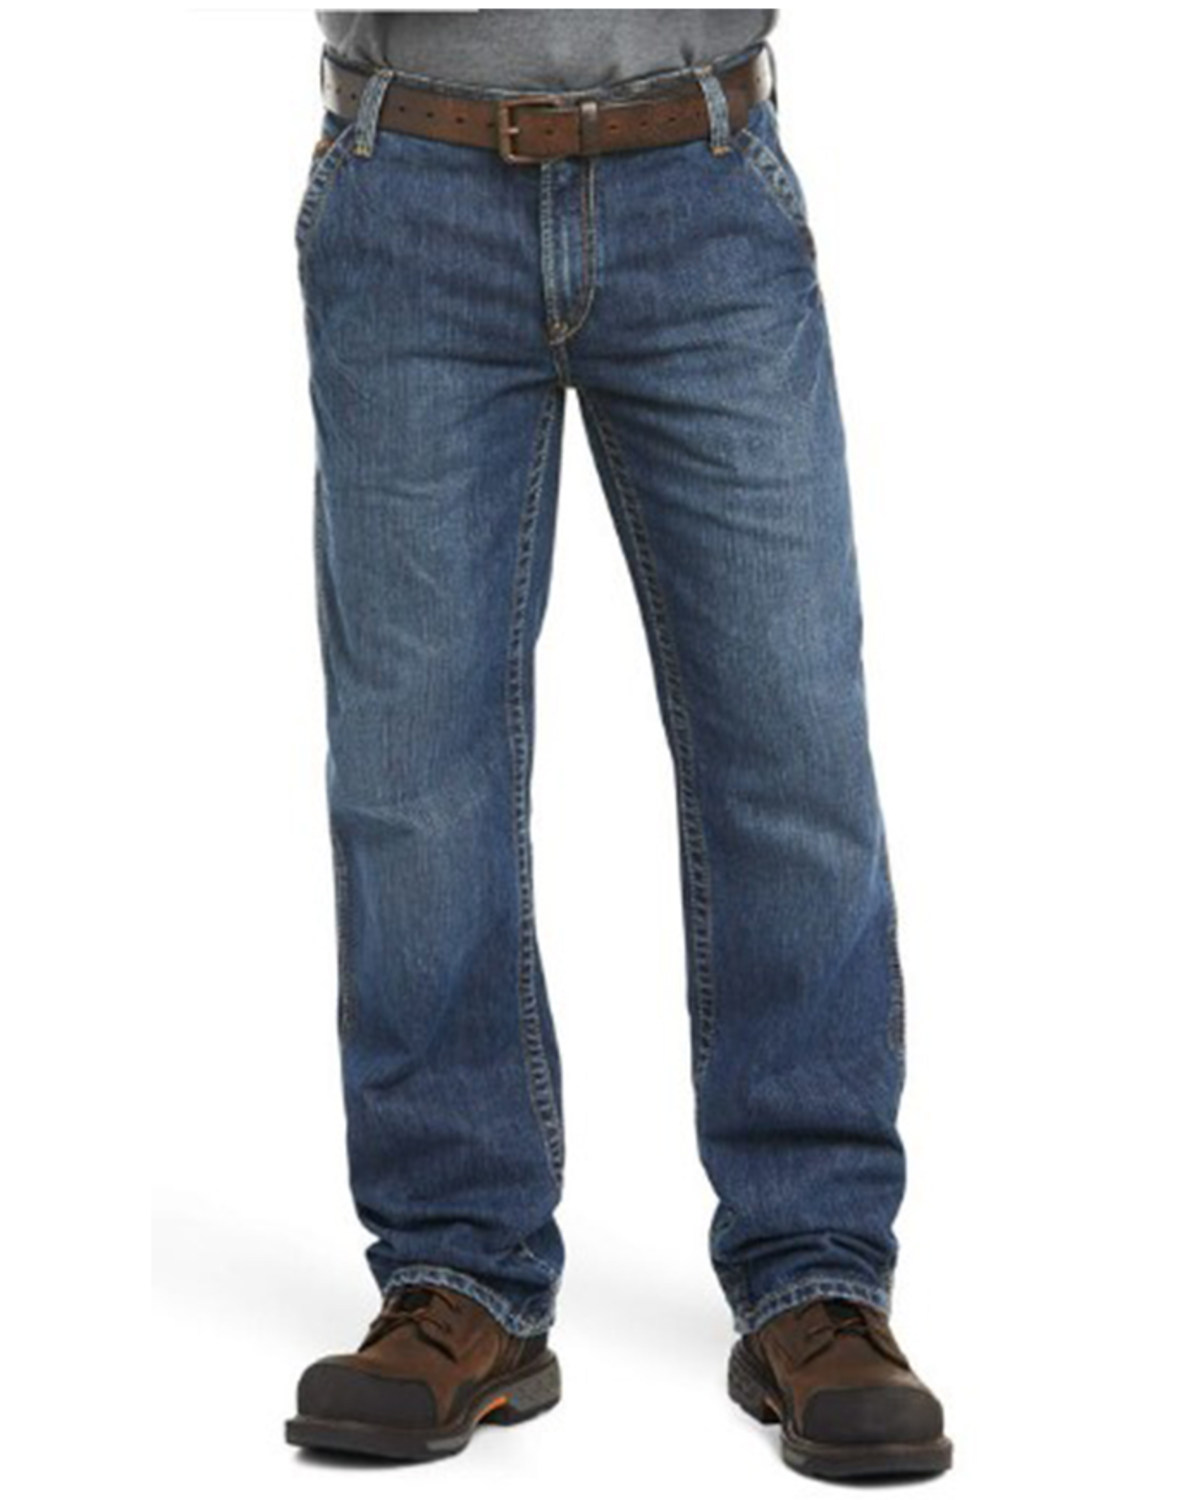 Ariat Men's FR M4 Workhorse Relaxed Fit Pants